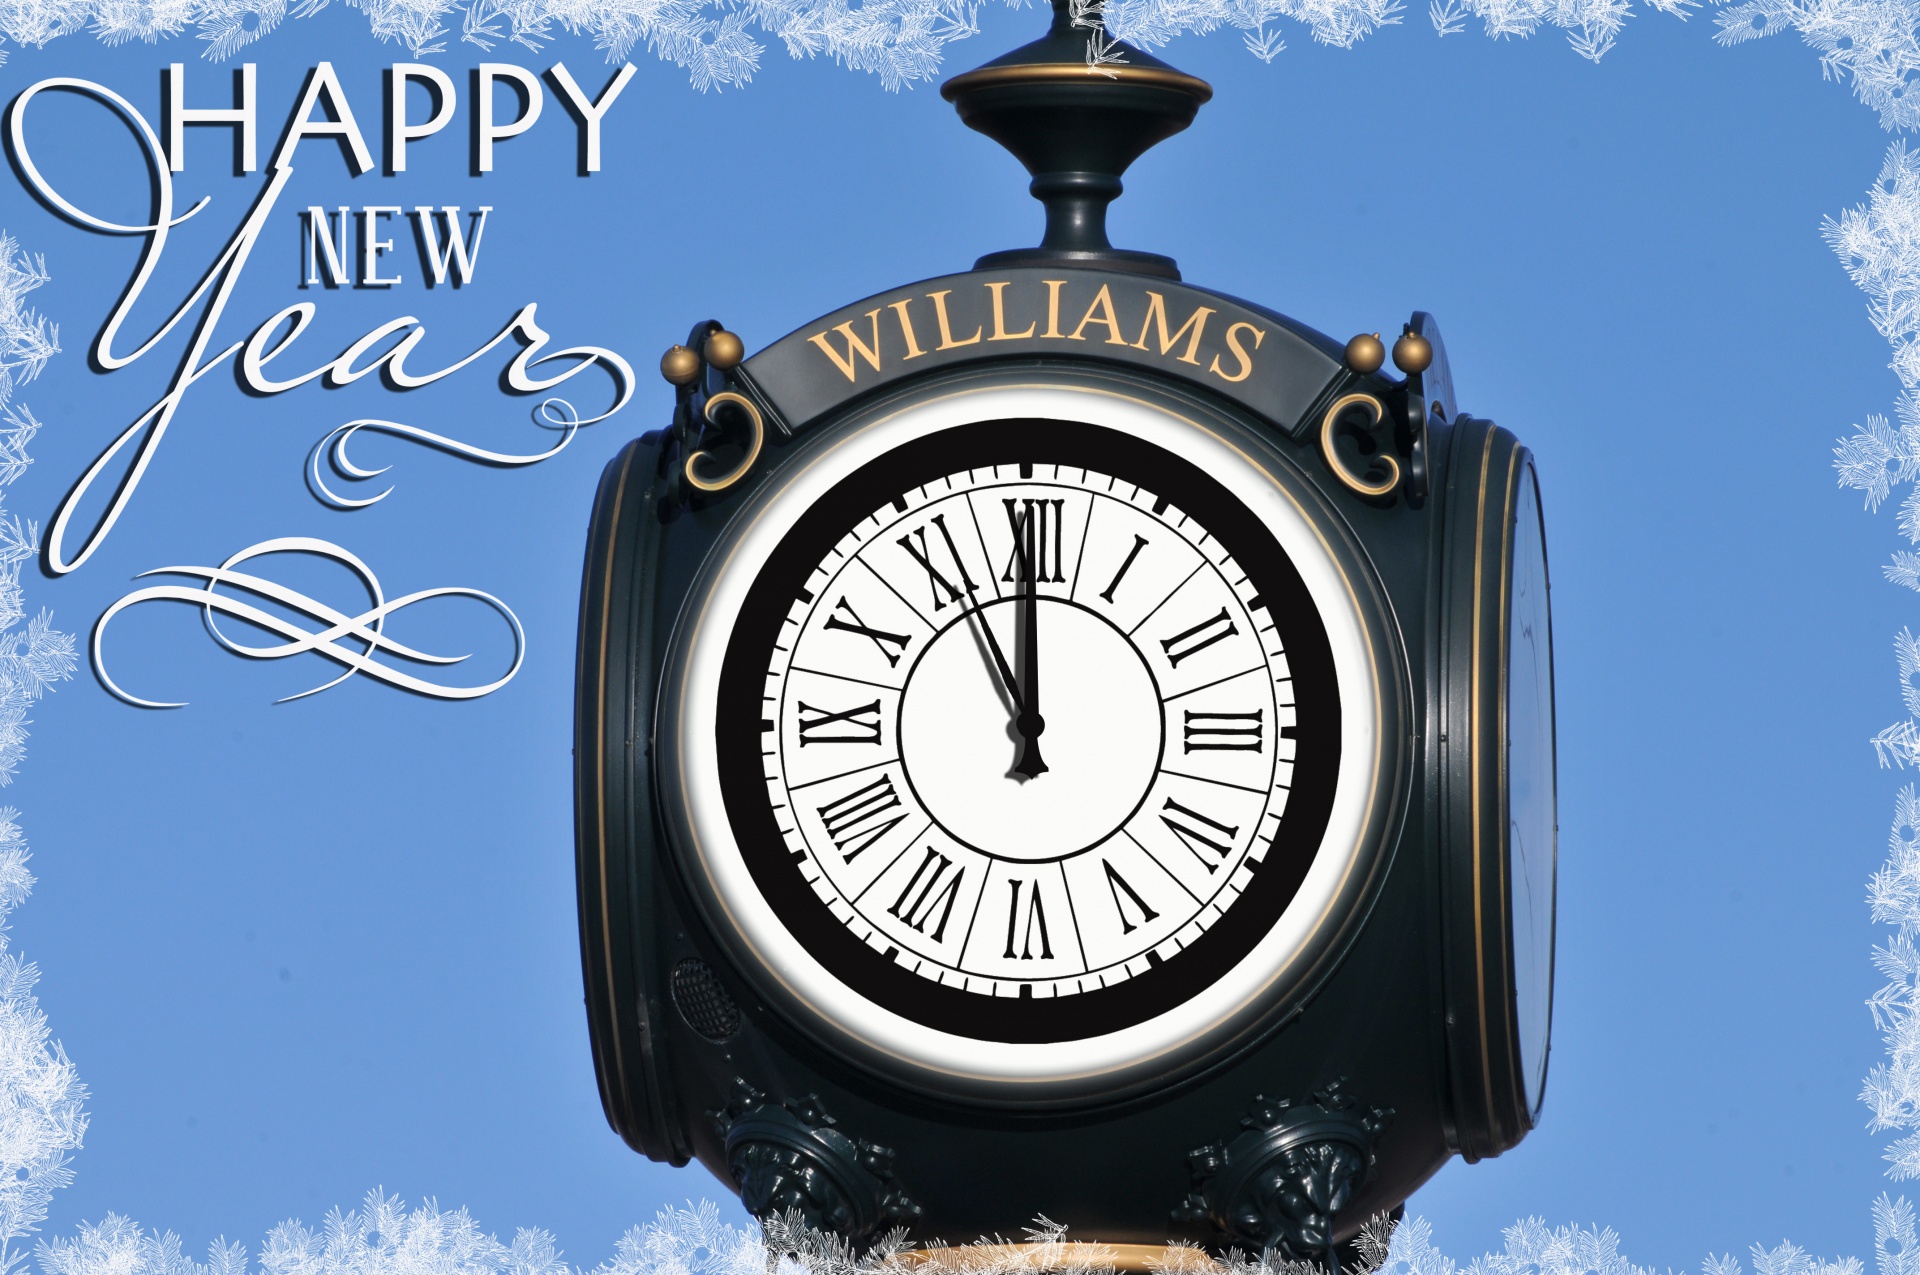 Vintage New Year Clock Free Stock Photo - Public Domain Pictures